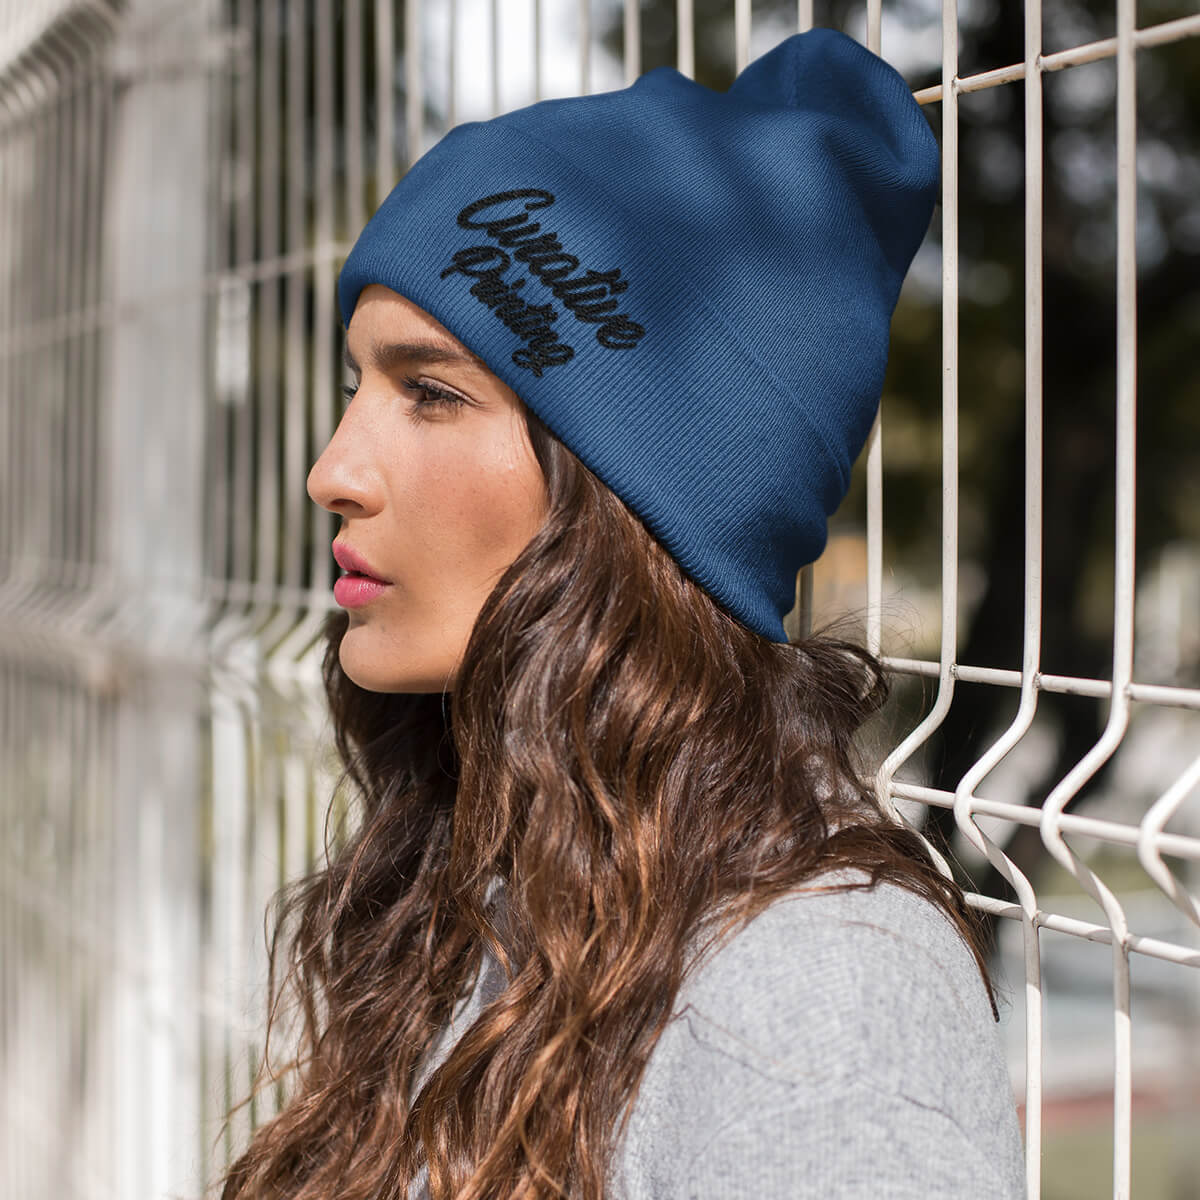 Woman wearing navy beanie with Curative Printing logo.